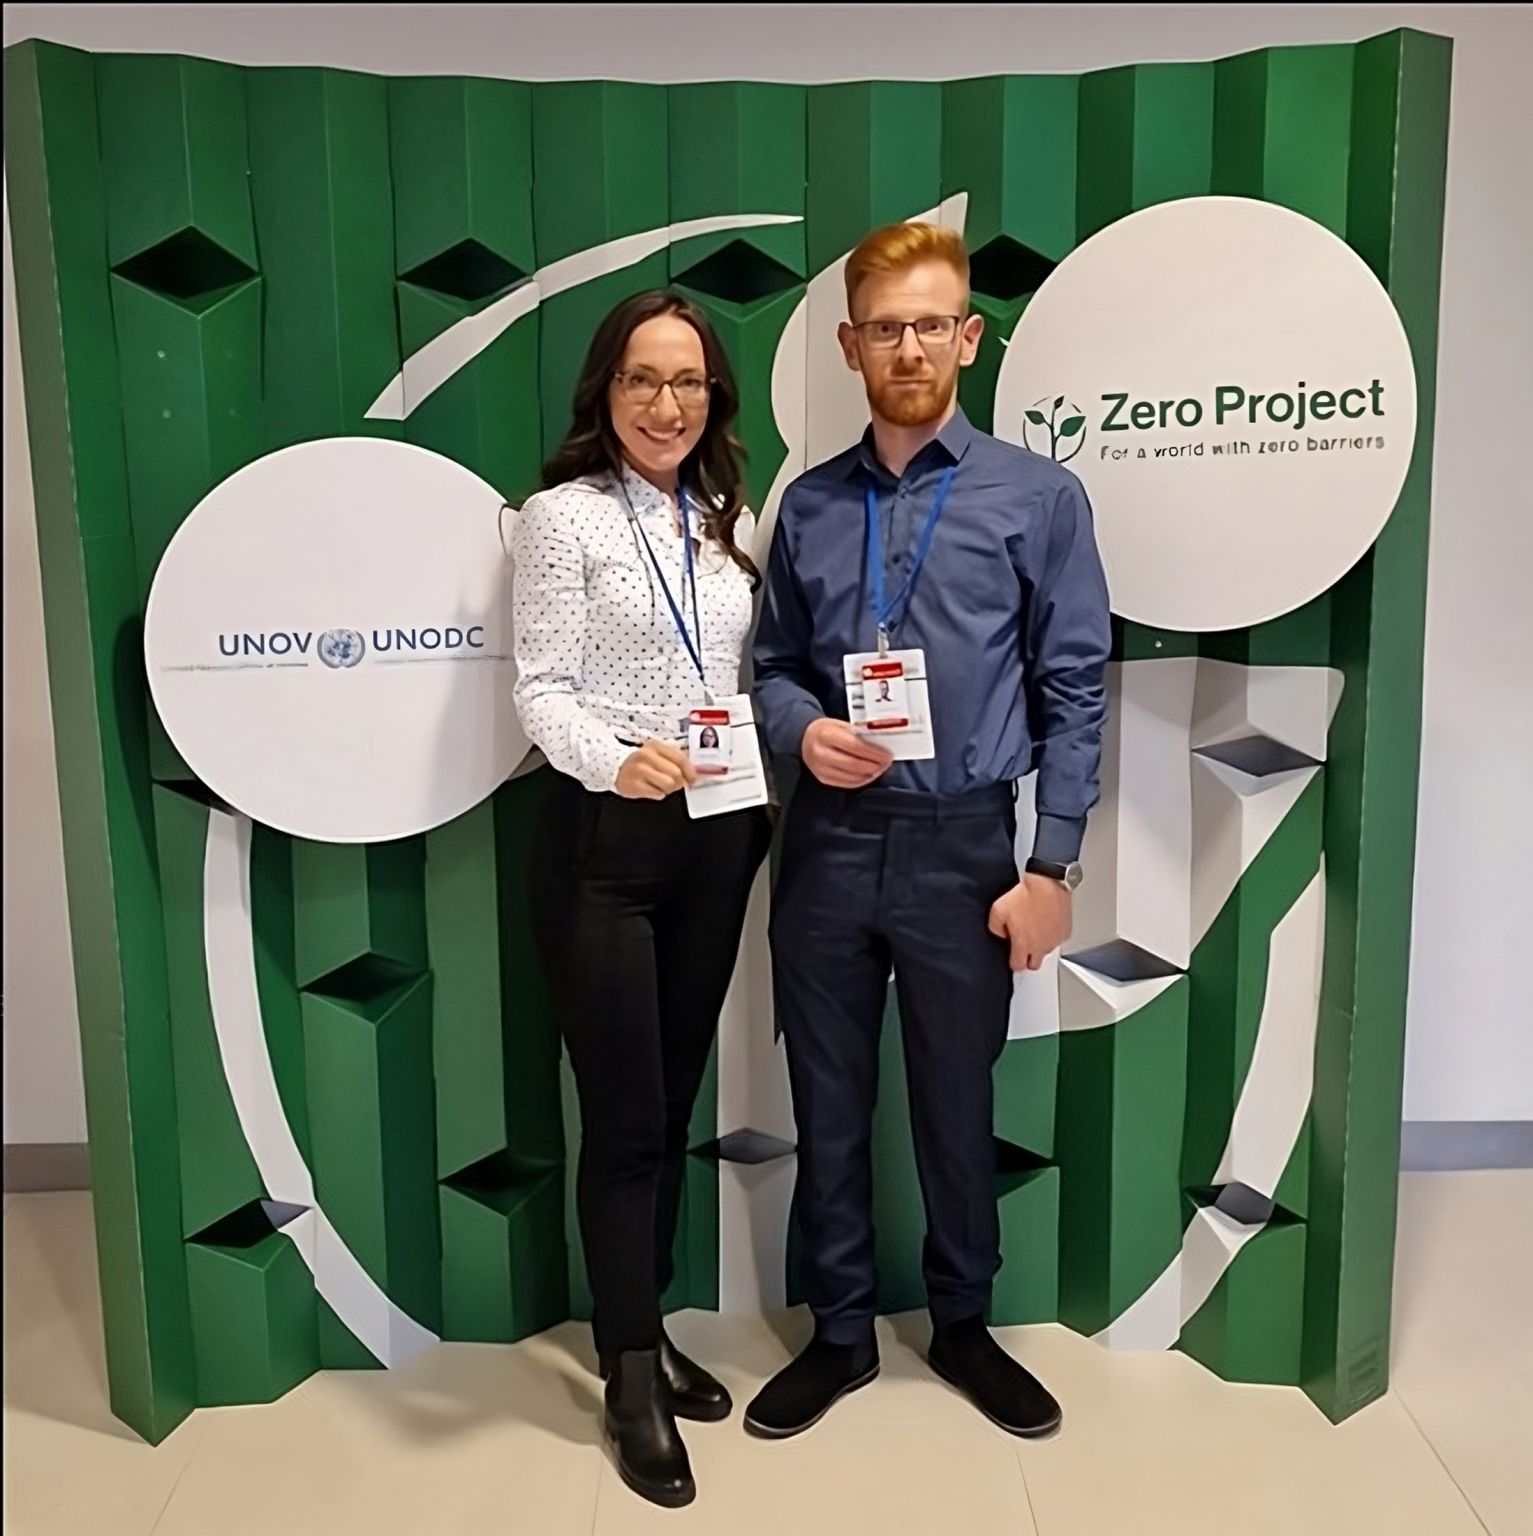 The CEO and founder Elizabeta with the digital marketer Dejan. 
The CEO has long wavy black hair. She is wearing glasses, white shirt with dots and black pants.
The digital marketer is ginger. Has a short hair and beard. He wears glasses, blue shirt and navy blue pants.

The background is a green screen with the logos of UNOV - UNODC and Zero Project.  
